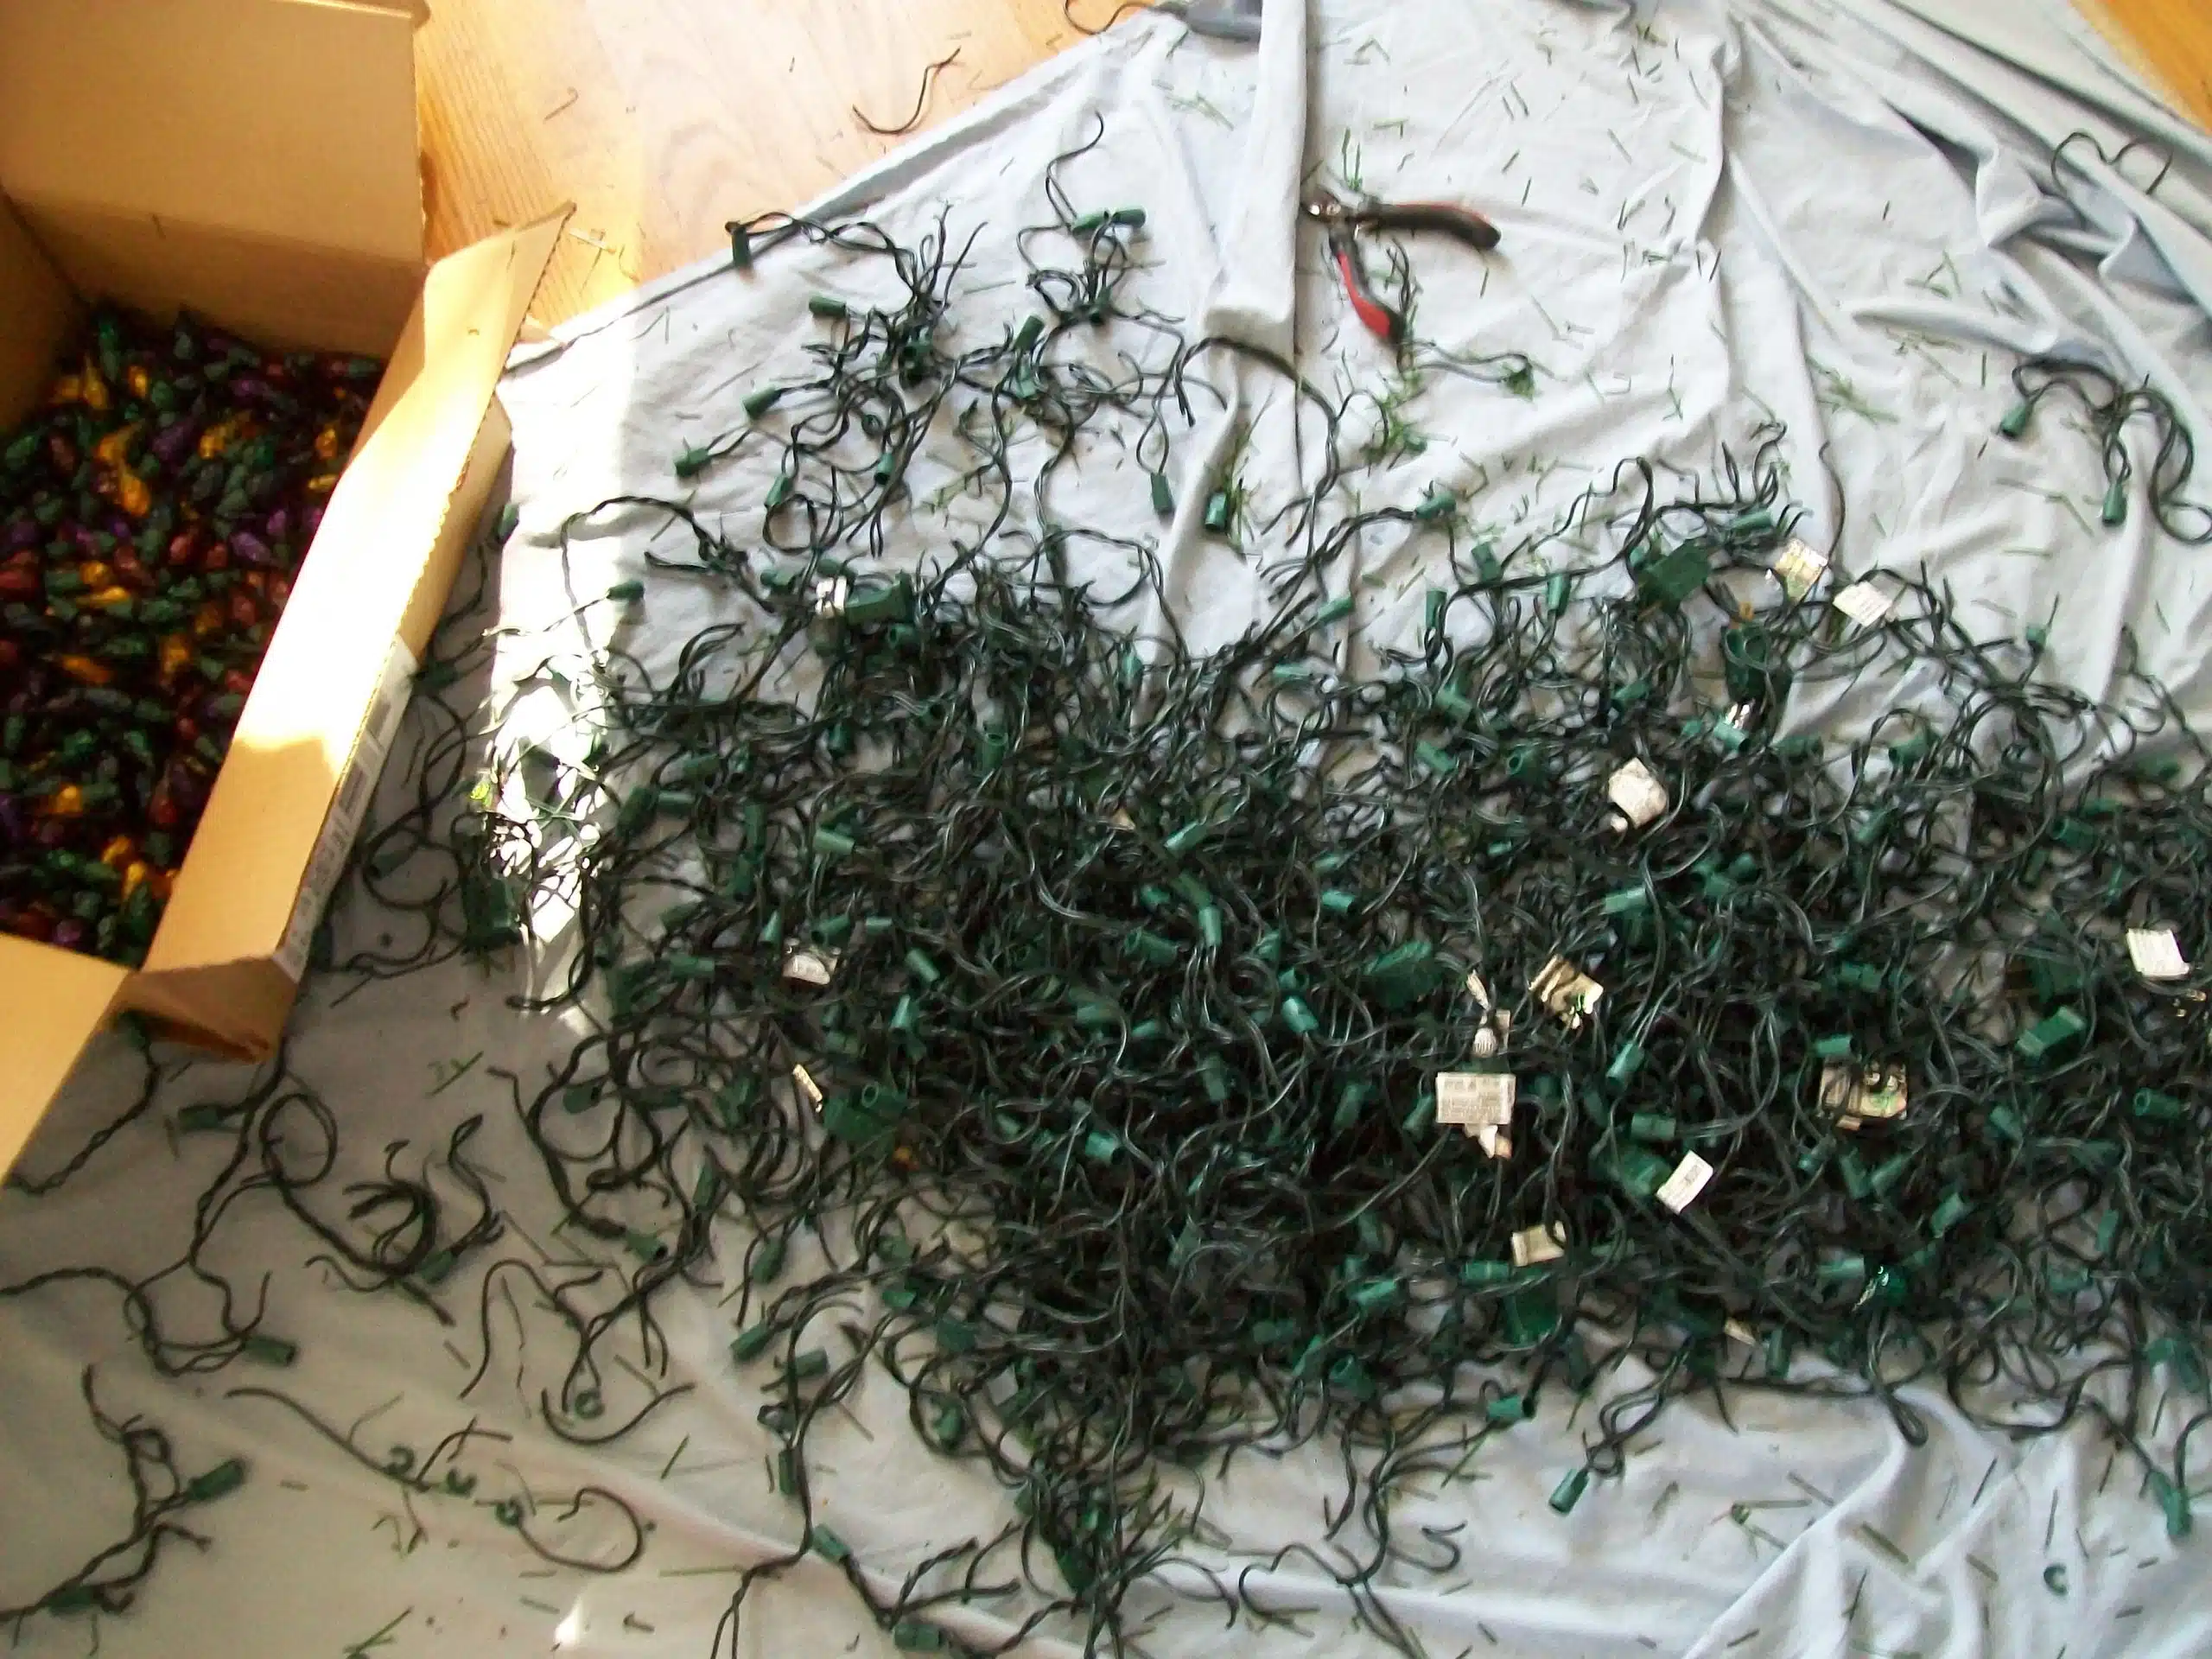 removing lights from pre-lit Christmas tree